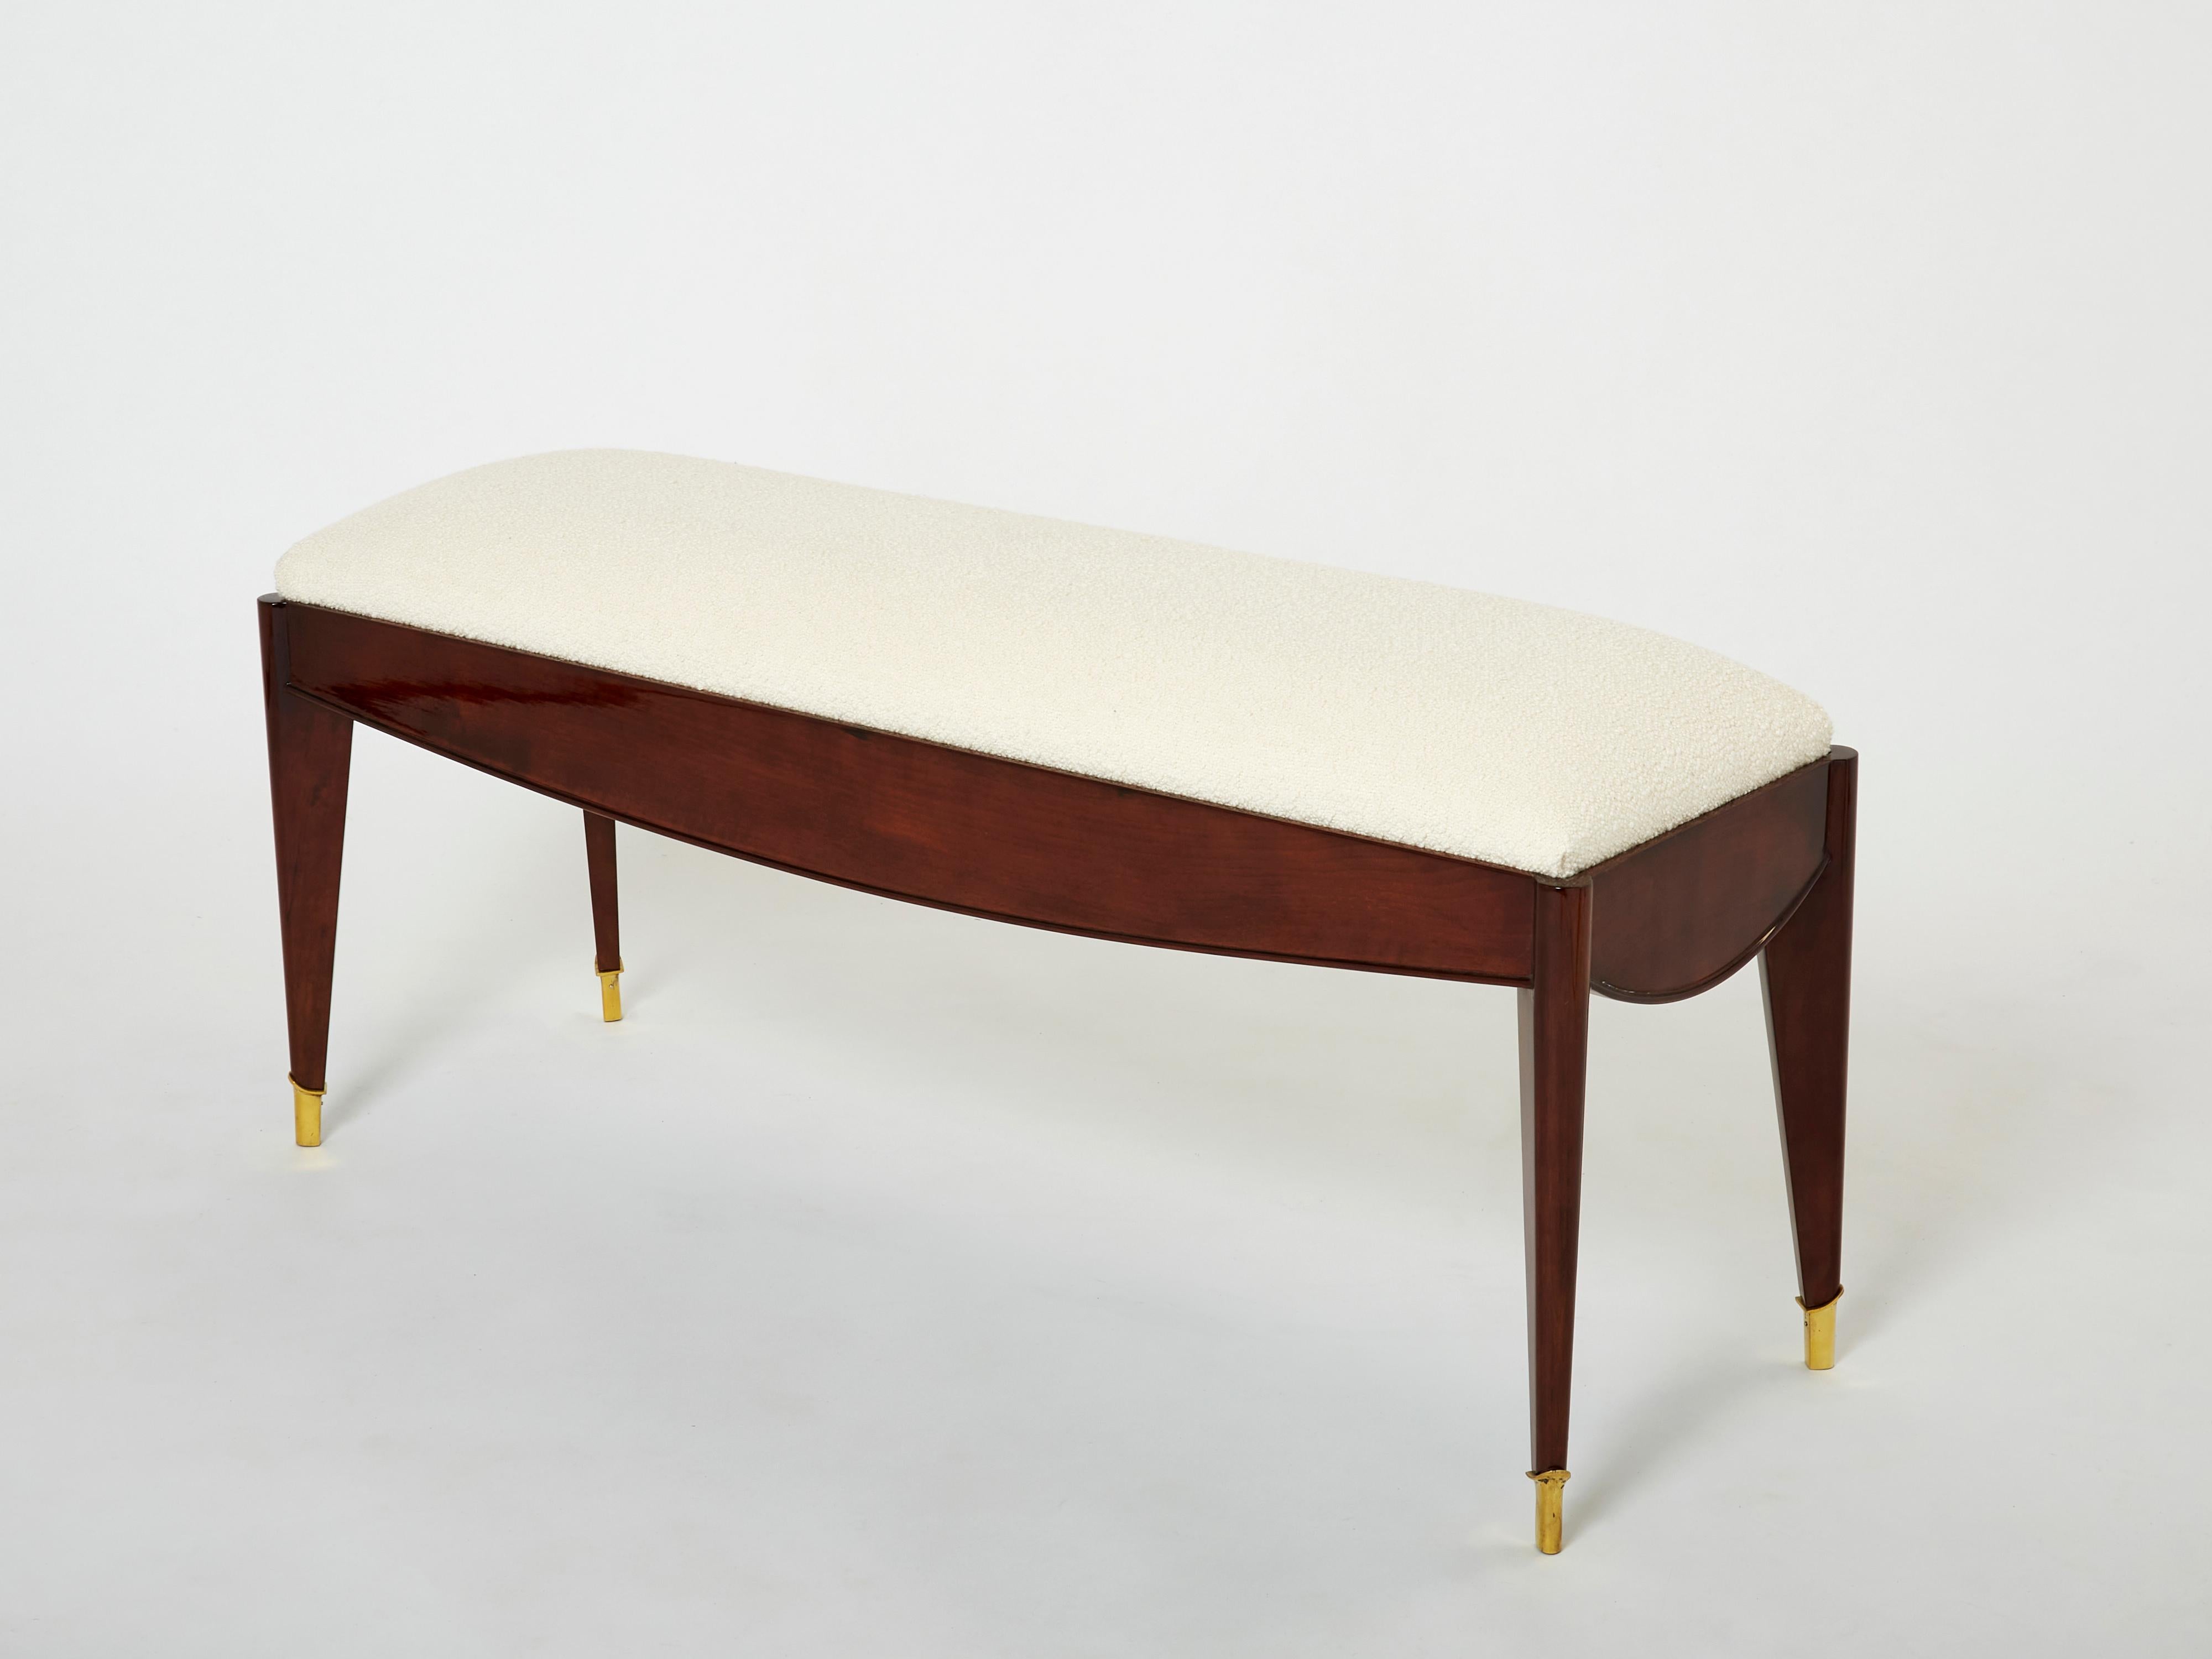 This beautiful French Art Deco bench was made in solid tinted walnut in the early 1940s by Maison Dominique, founded by André Domin and Marcel Genevrière. The design is truly timeless and pure, the brass sabots finishing the piece perfectly. It has